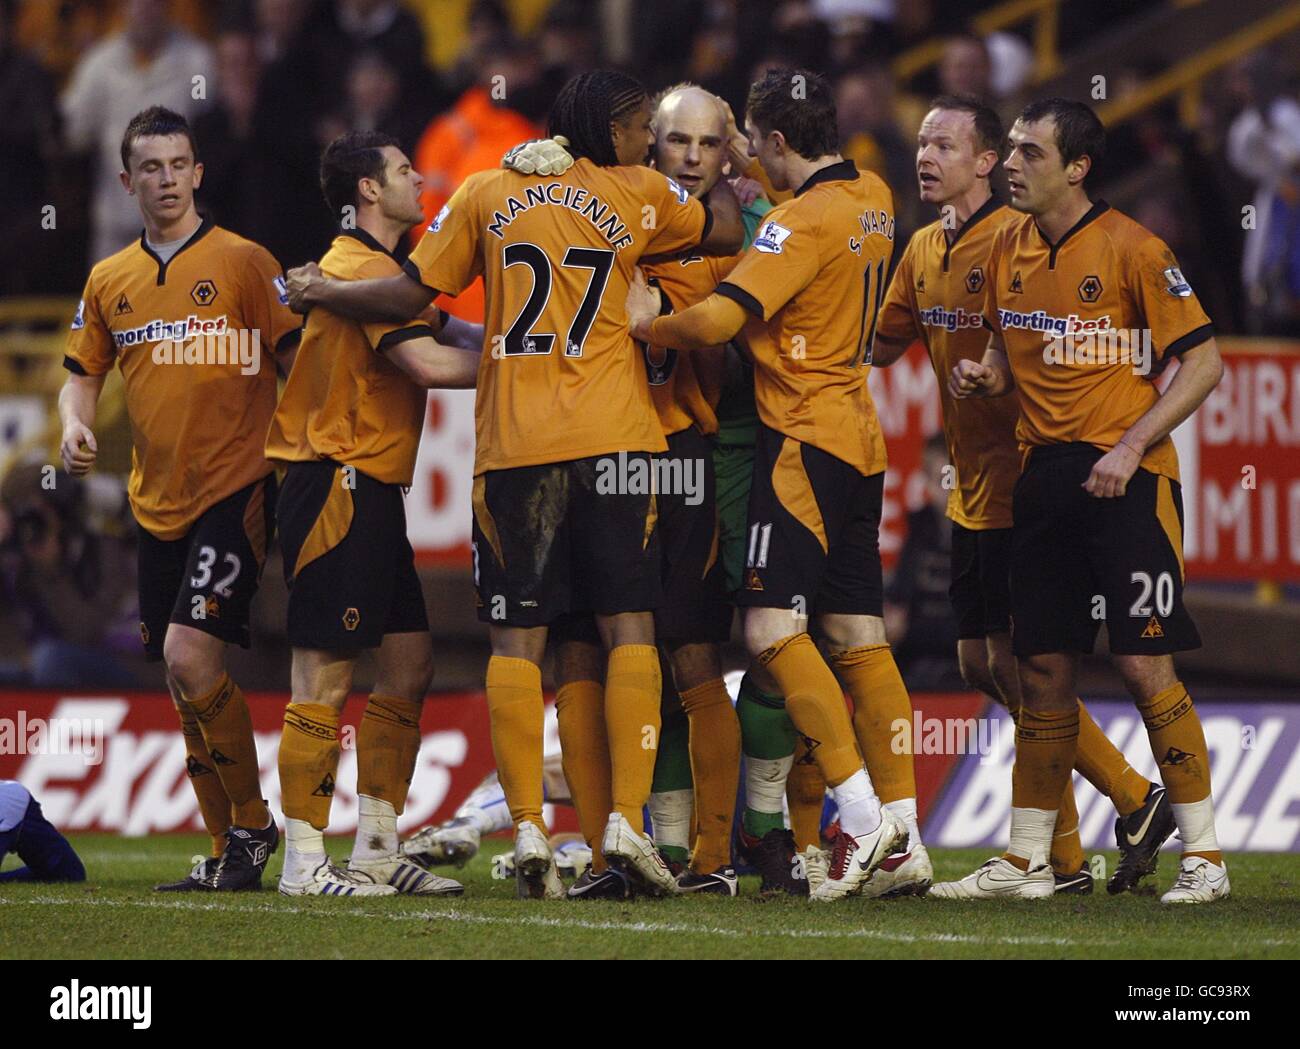 Wolverhampton Wanderers goalkeeper Marcus Hahnemann (centre) celebrates with his team mates after saving a shot on goal shortly after a penalty. Stock Photo